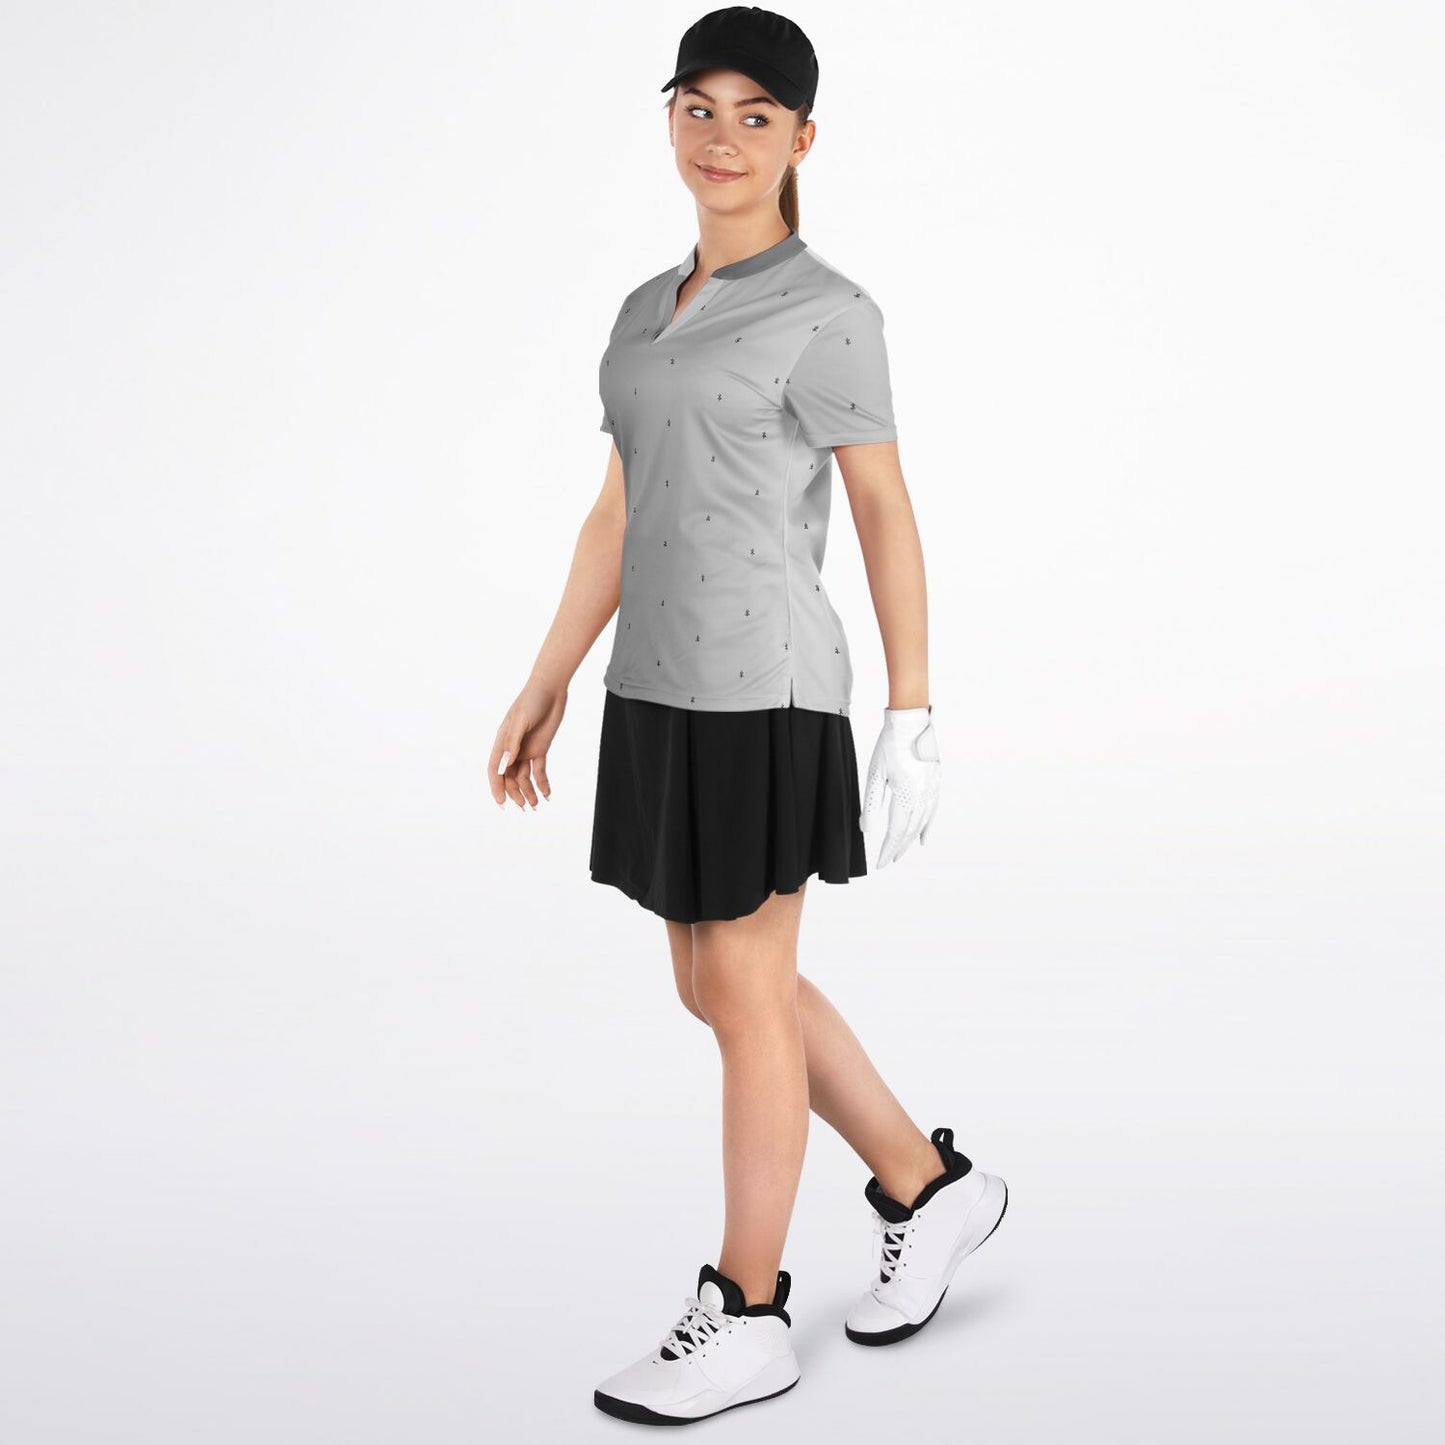 Women's Steel Competition Polo